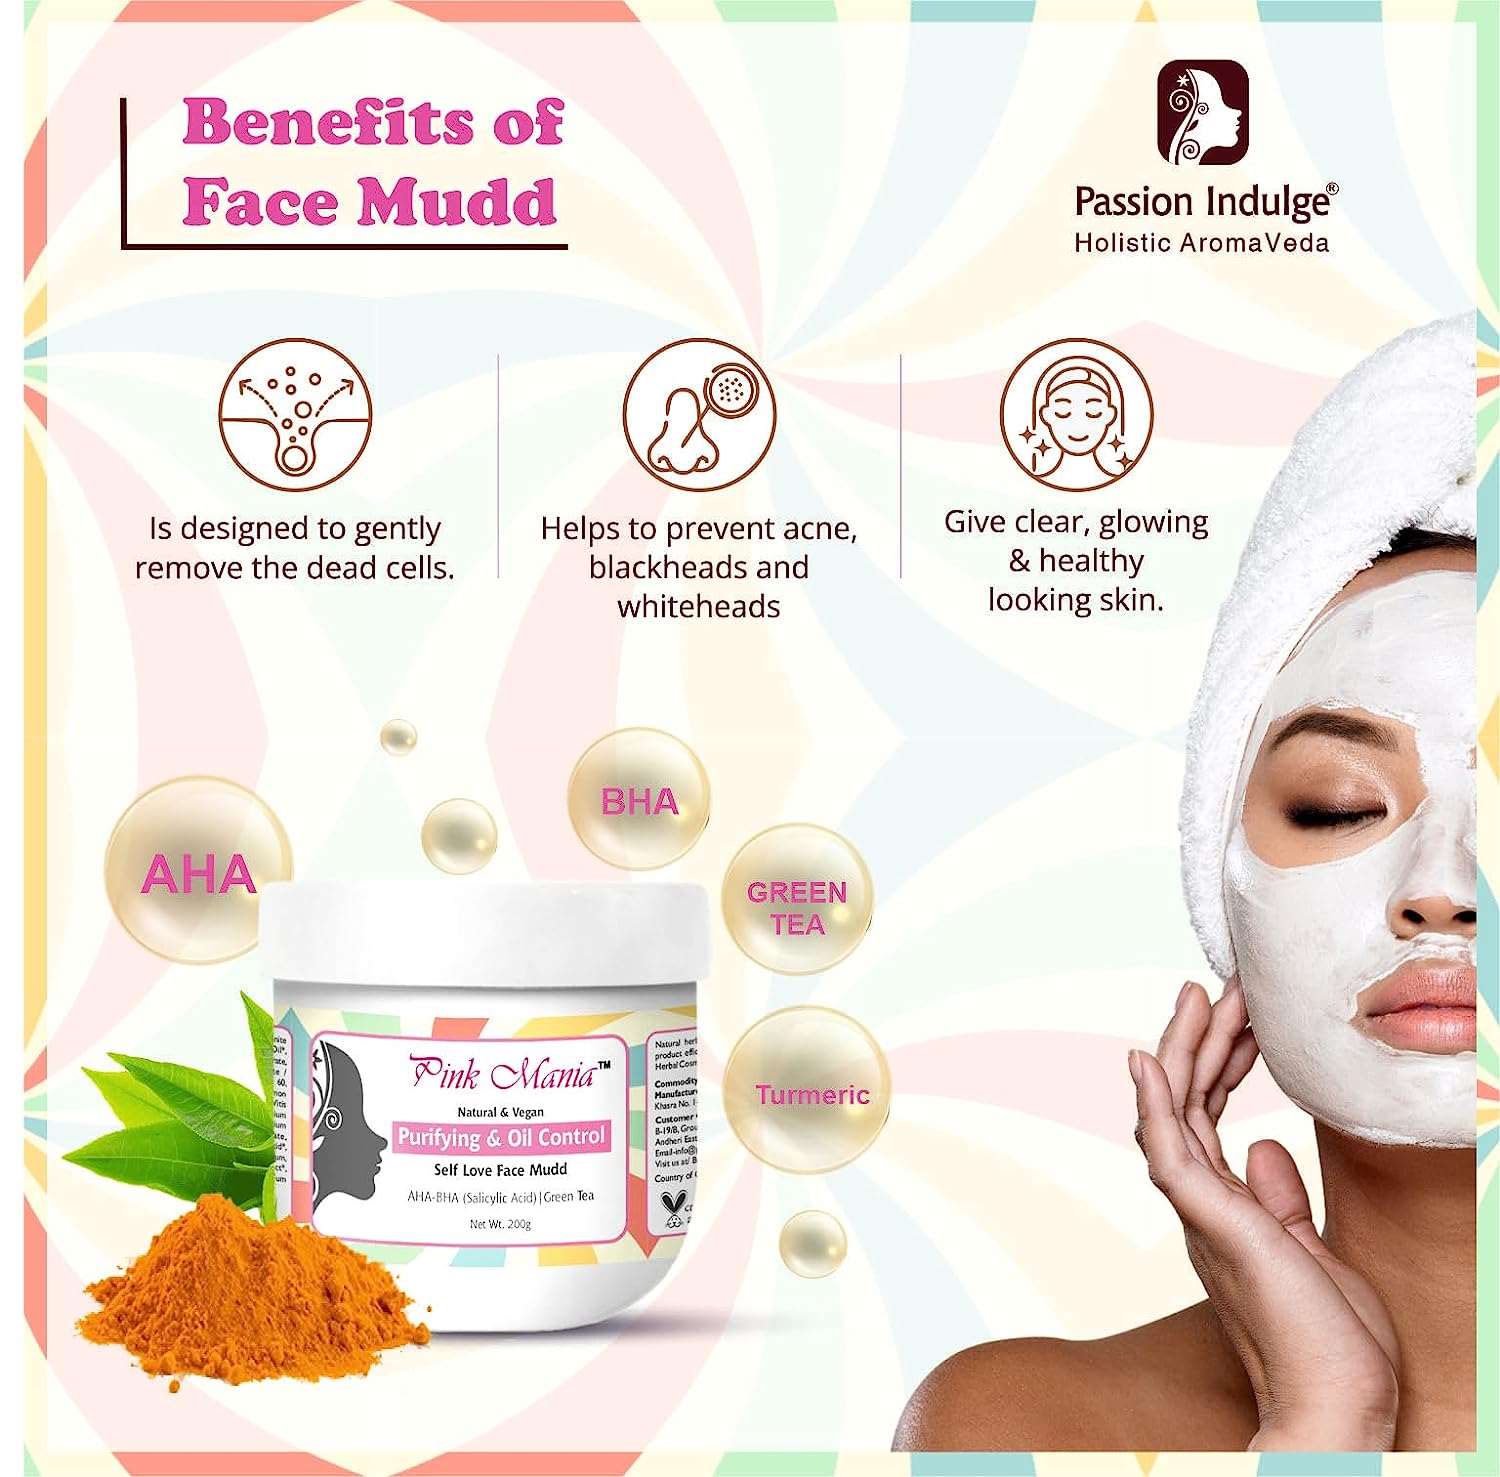 Pink Mania Purifying & Oil Control AHA BHA Face Mudd With Turmeric & Green Tea |Remove the dead cells & helps to prevent acne, blackheads and whiteheads | Natural & Vegan - 200g